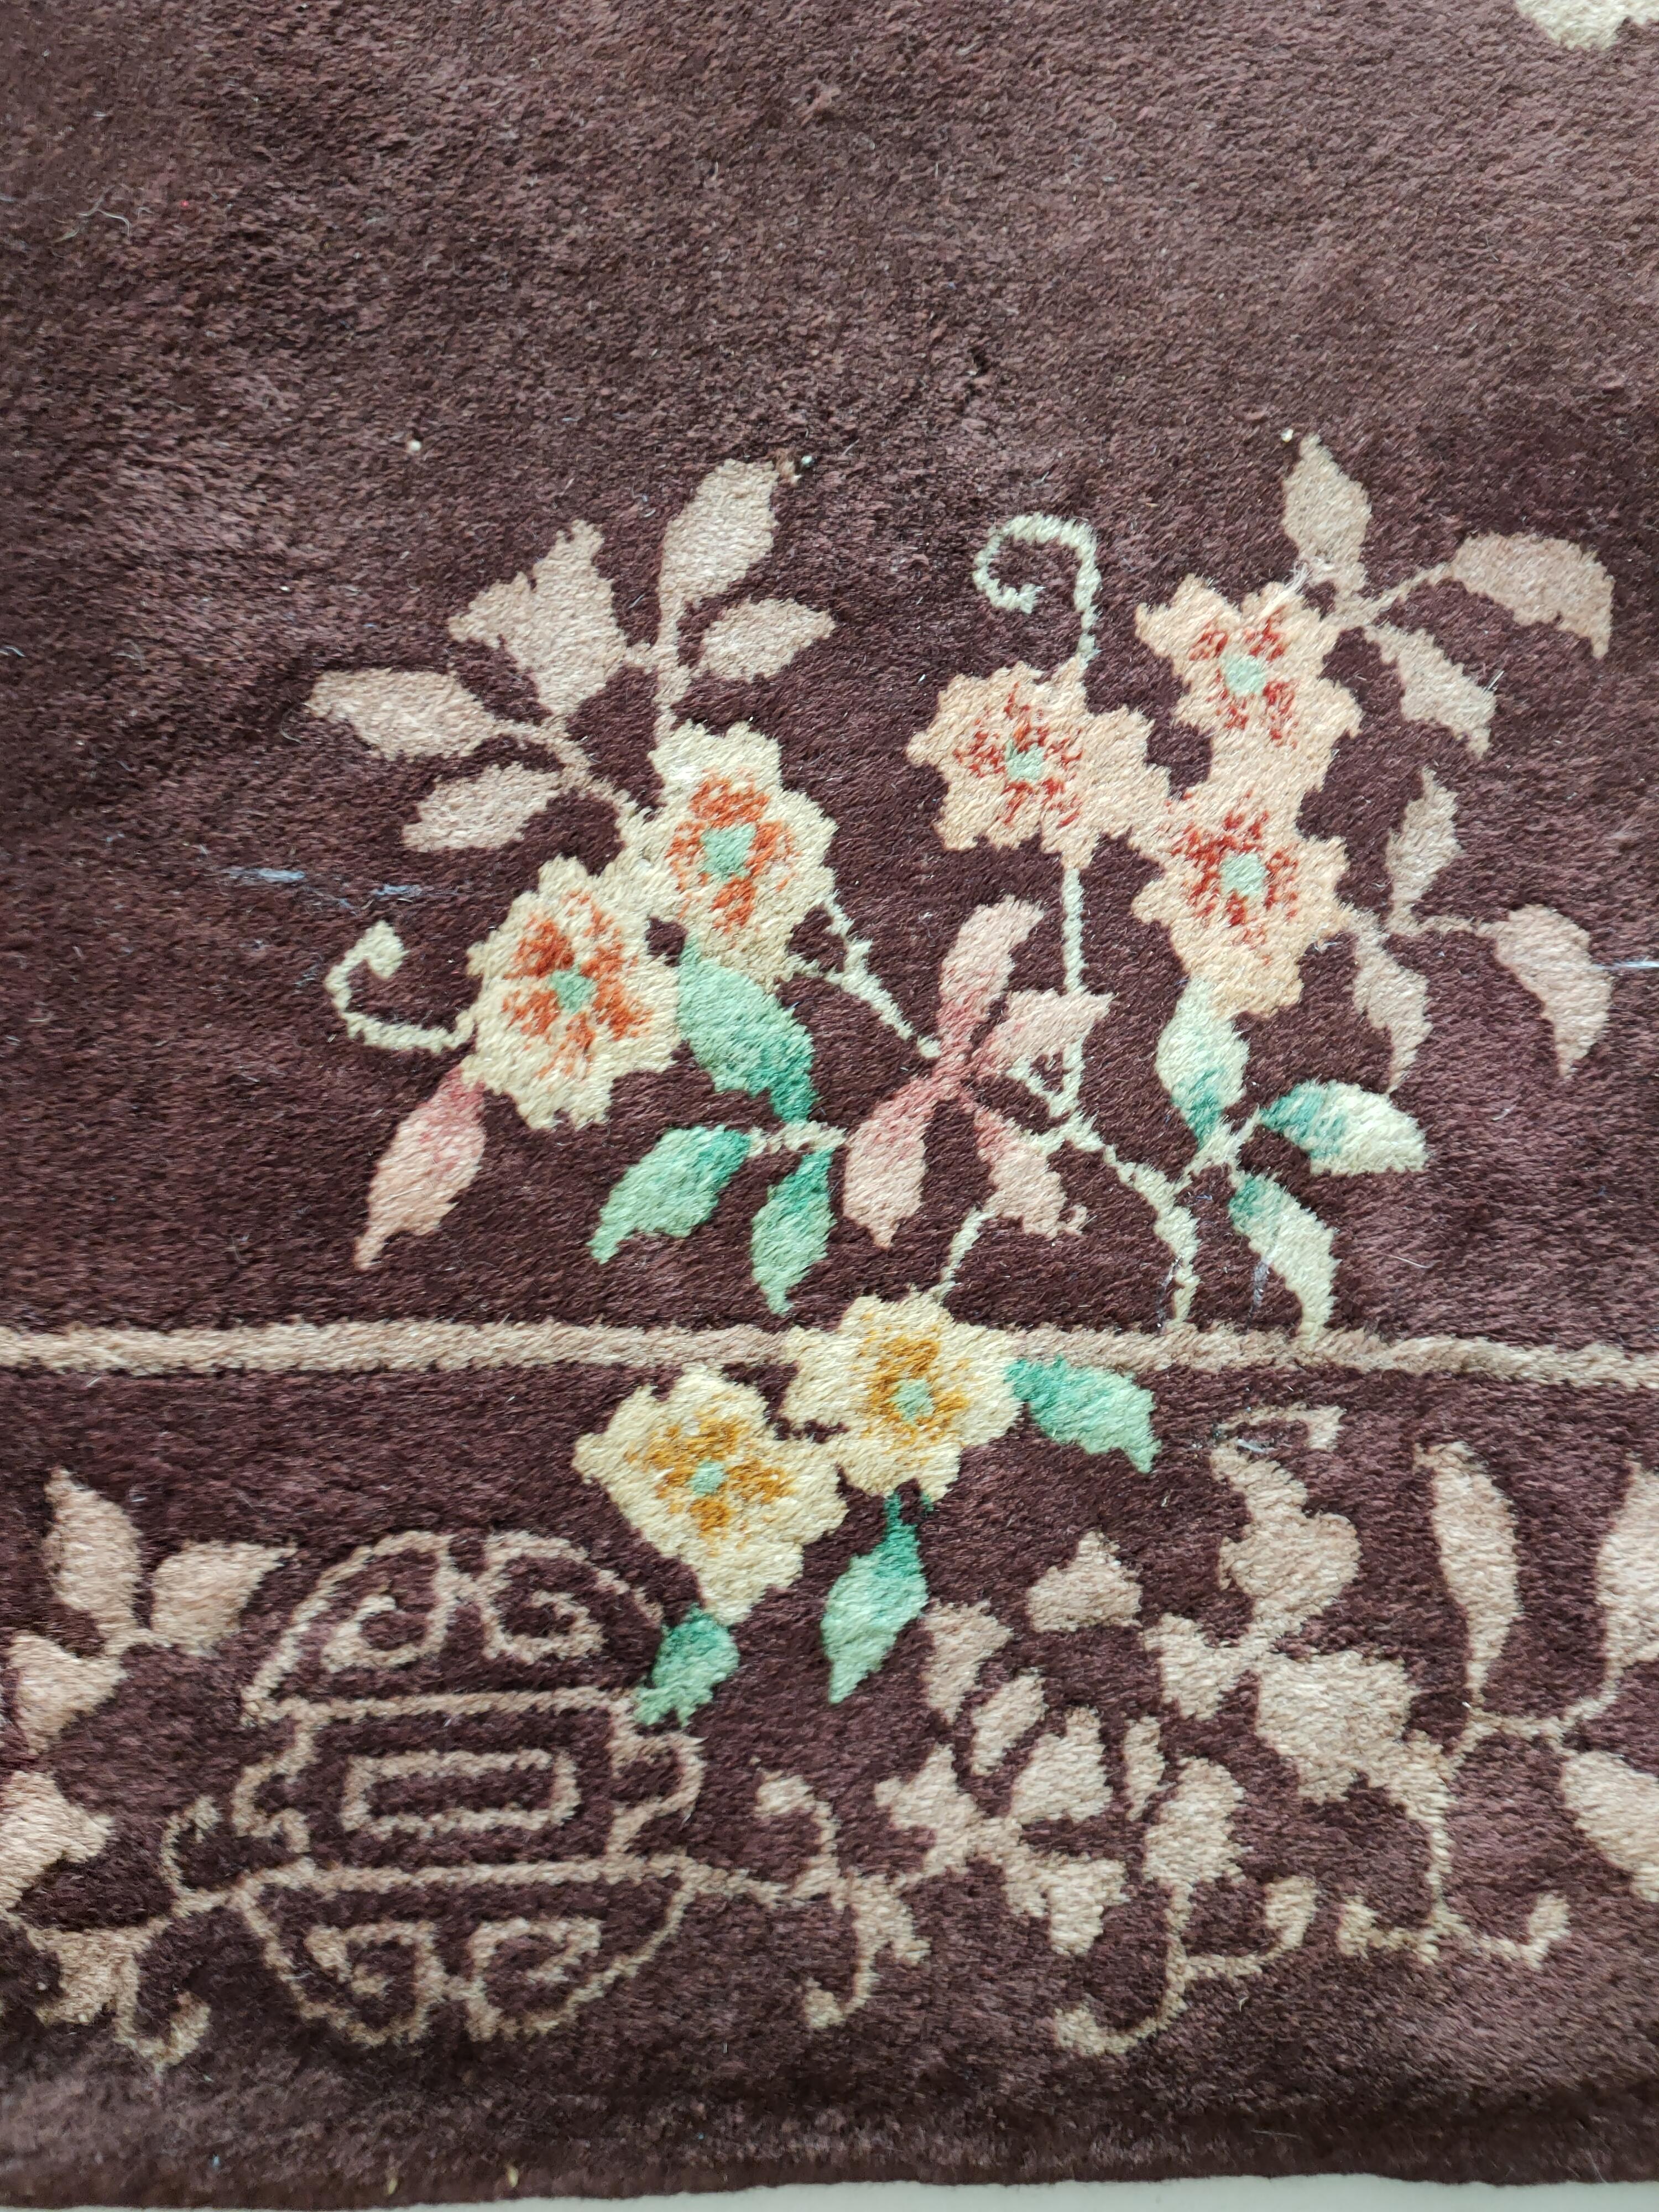 An asymmetric array of 4 flowering sprays ornaments the open scarlet field of this 1920s Art Deco rug
with a tonally matching border of four Shou (good luck) medallions and flowering arabesques featuring
peony corners. The field corners are in a